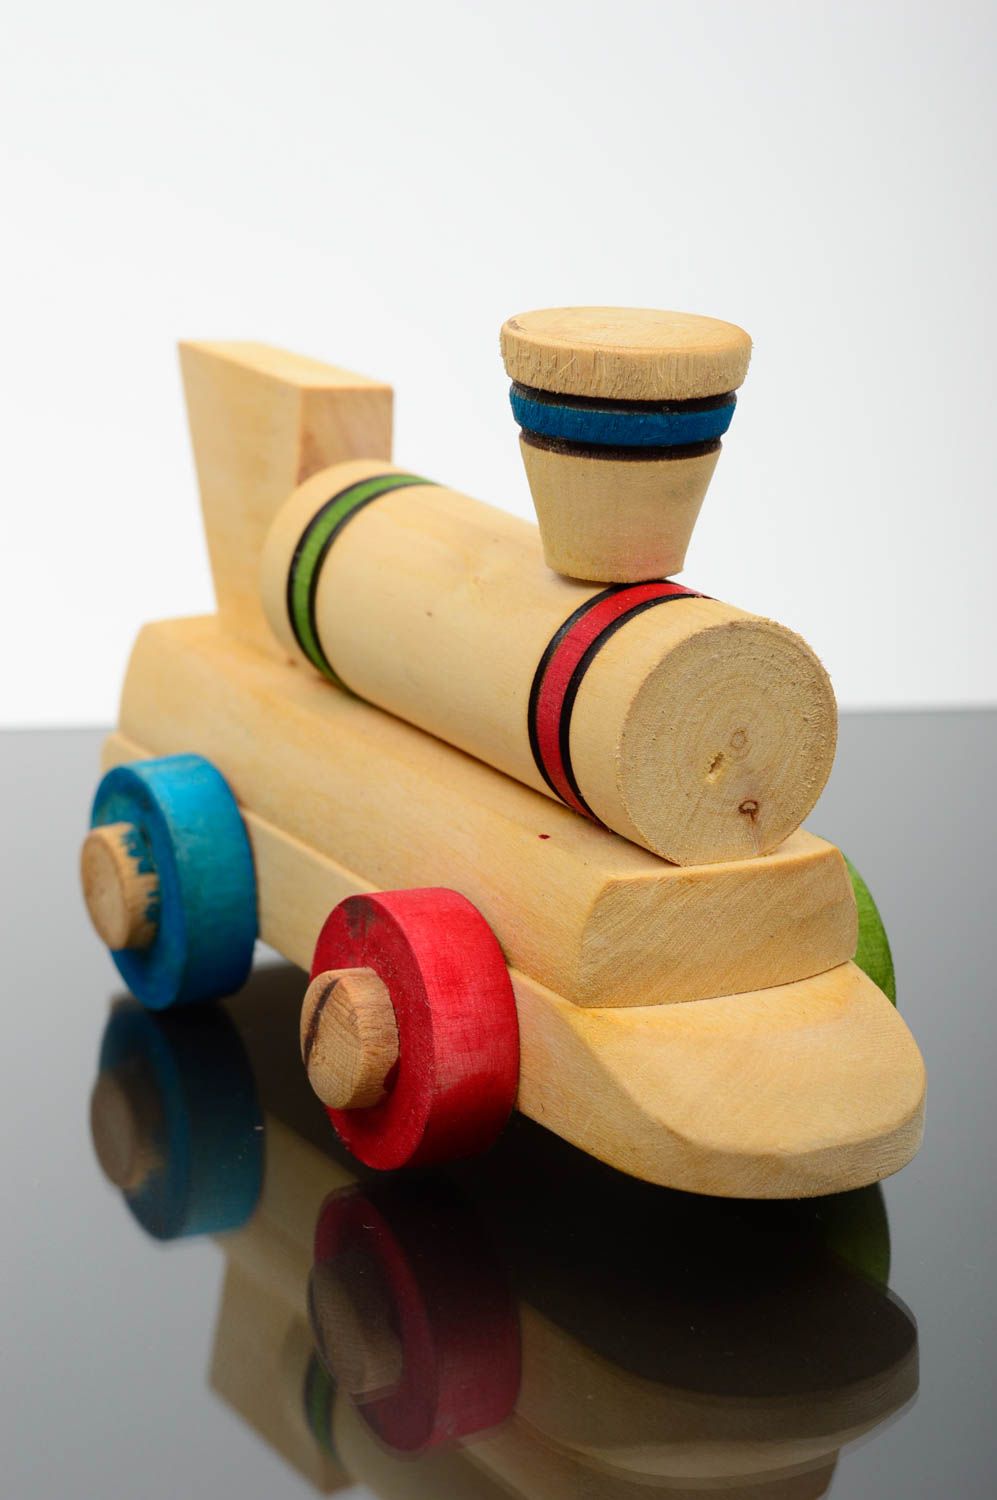 Wooden train toy handmade toy homemade home decor wooden gifts presents for kids photo 2